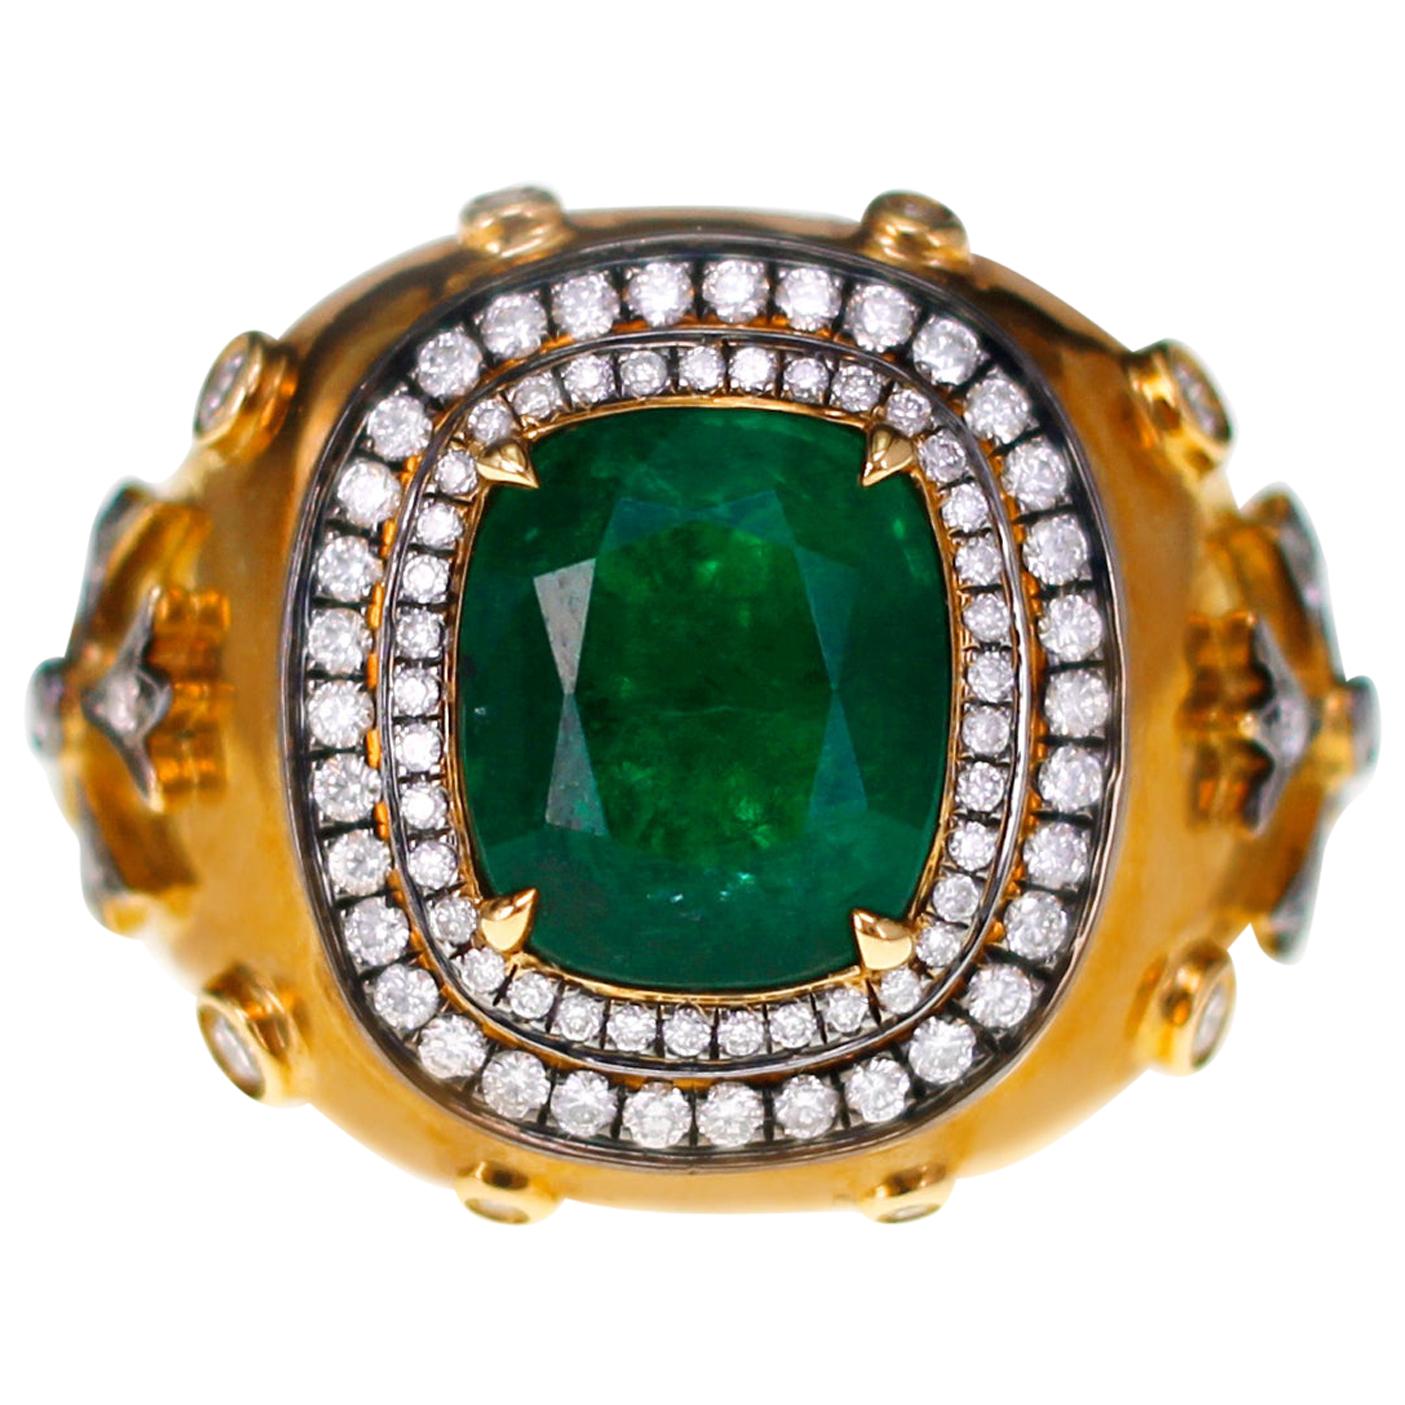 3.19 Carat Vivid Green Zambian Emerald in Antique Style Bridal Ring For Sale